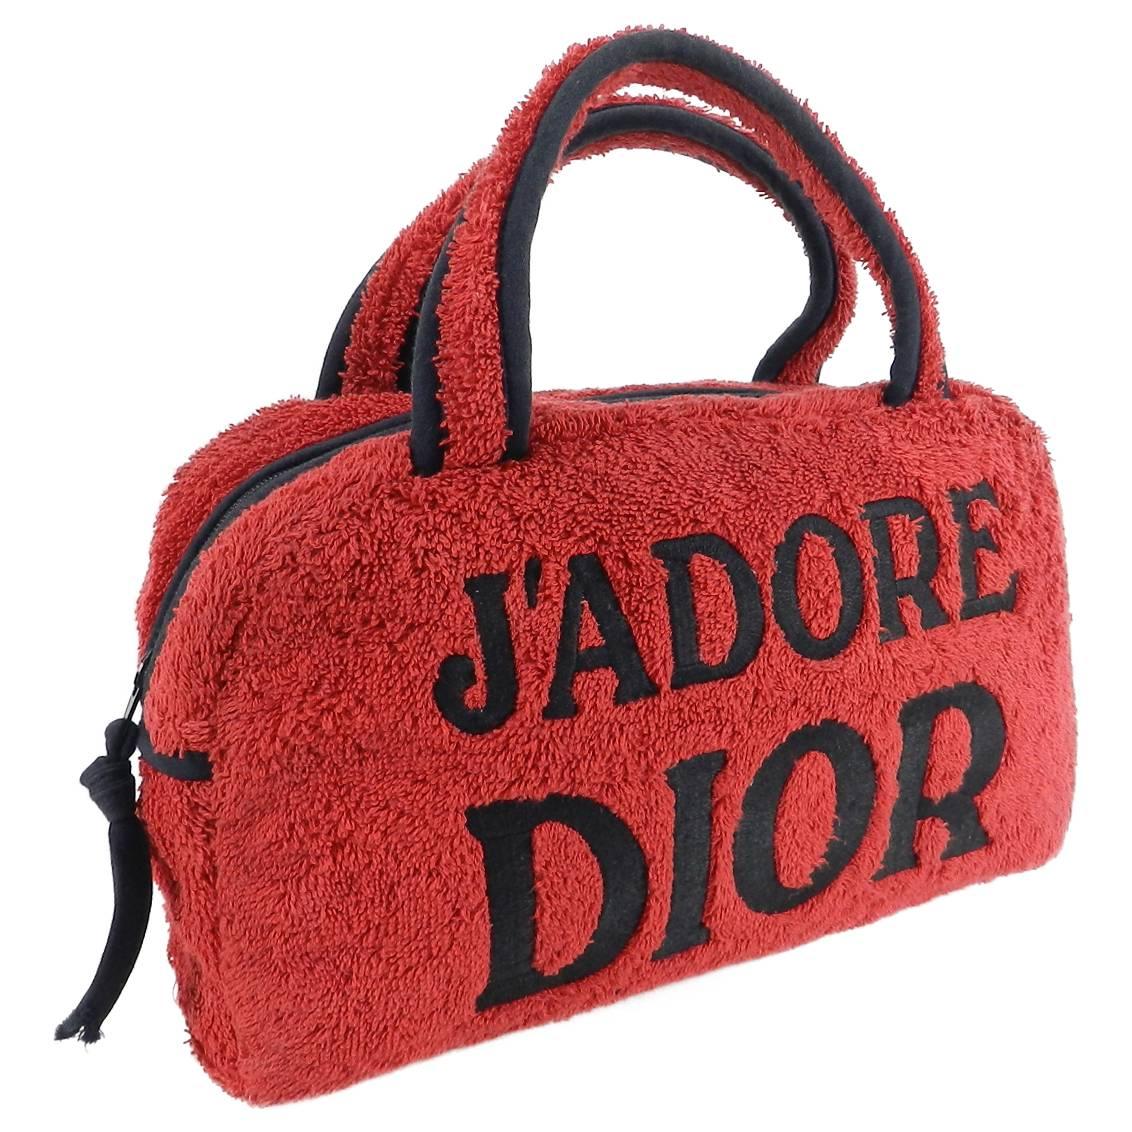 Christian Dior Vintage J'adore Dior Red Terry cloth Small Bag.  Circa early 2000's John Galliano era. These were originally make-up cosmetic or toiletry bags that accompanied J'adore Dior perfume rather than sold as Dior label handbags. However this